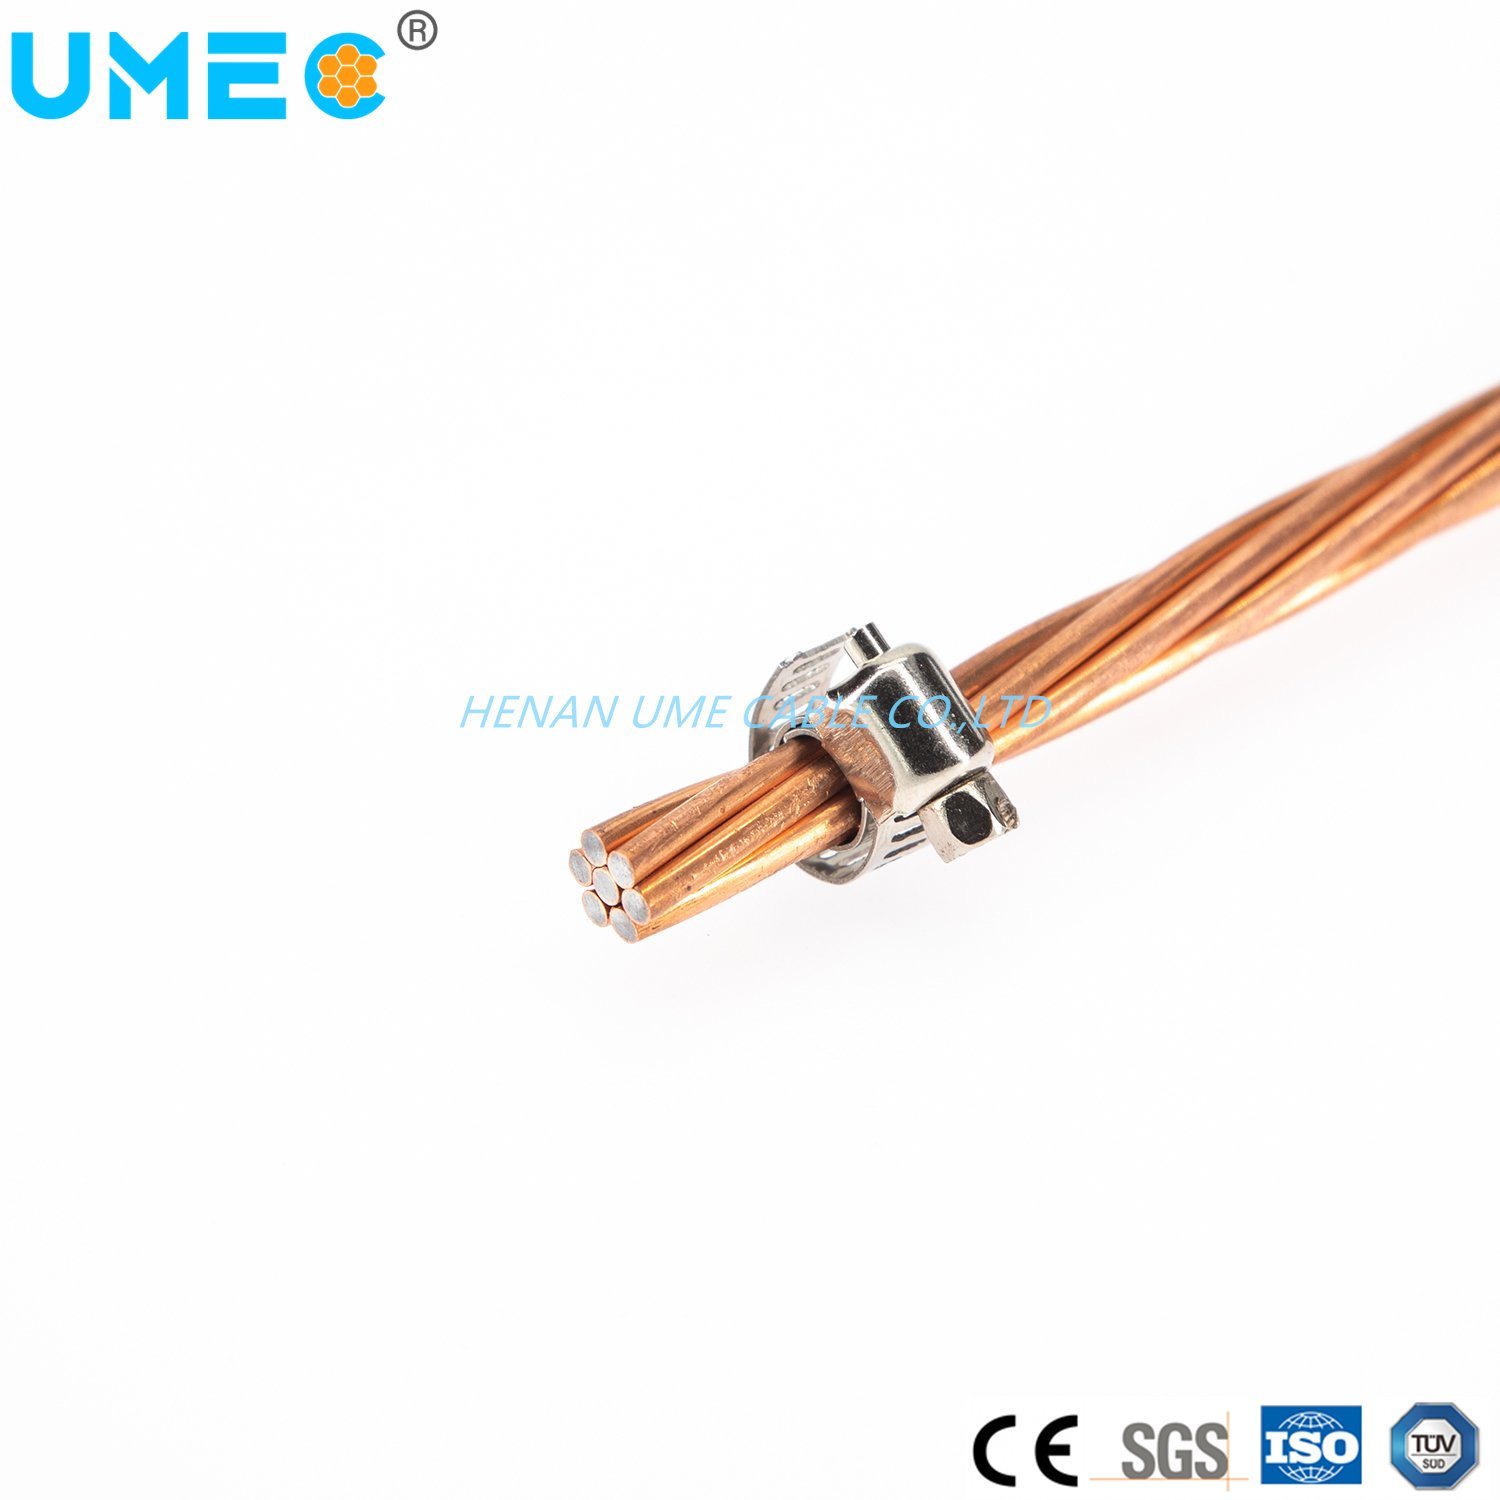 Wholesale Stranded Wire Conductivity20%, 25%, 30%, 40% Copper Clad Steel Wire Types of Conductor Wire (CCS) 0.81mm